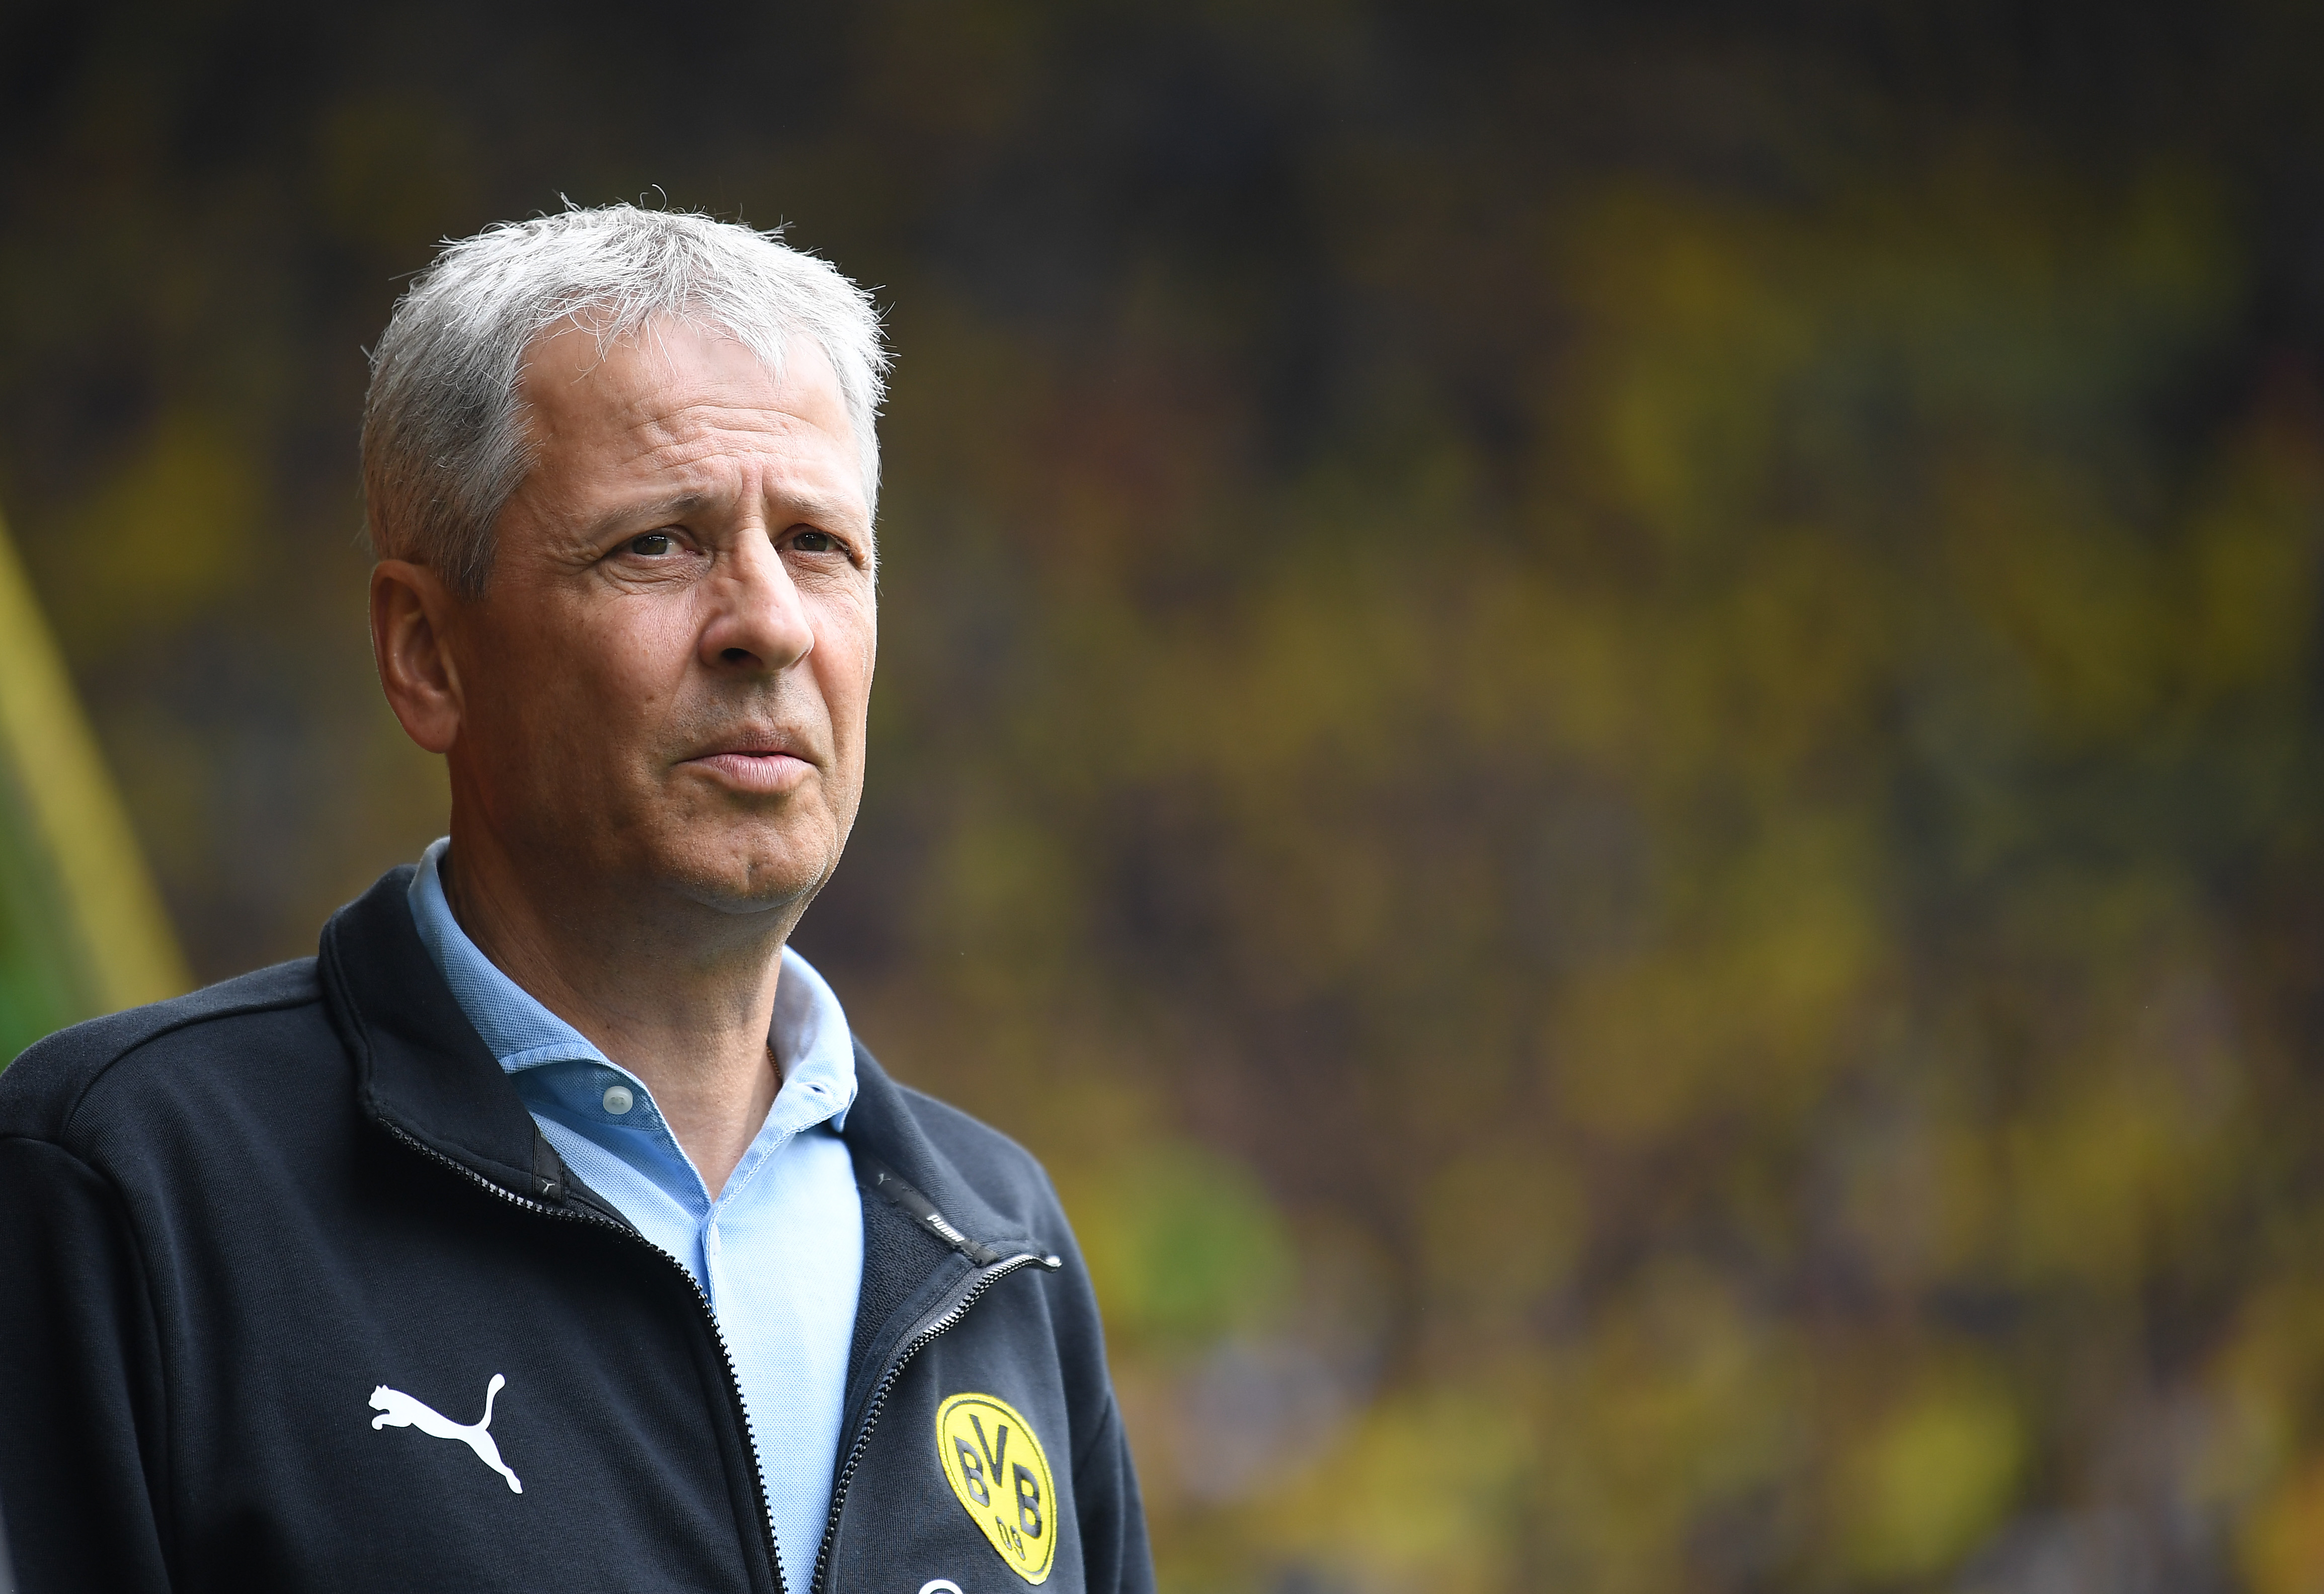 DORTMUND, GERMANY - AUGUST 17: Lucien Favre, head coach of Dortmund looks on during the Bundesliga match between Borussia Dortmund and FC Augsburg at Signal Iduna Park on August 17, 2019 in Dortmund, Germany. (Photo by Stuart Franklin/Bongarts/Getty Images)